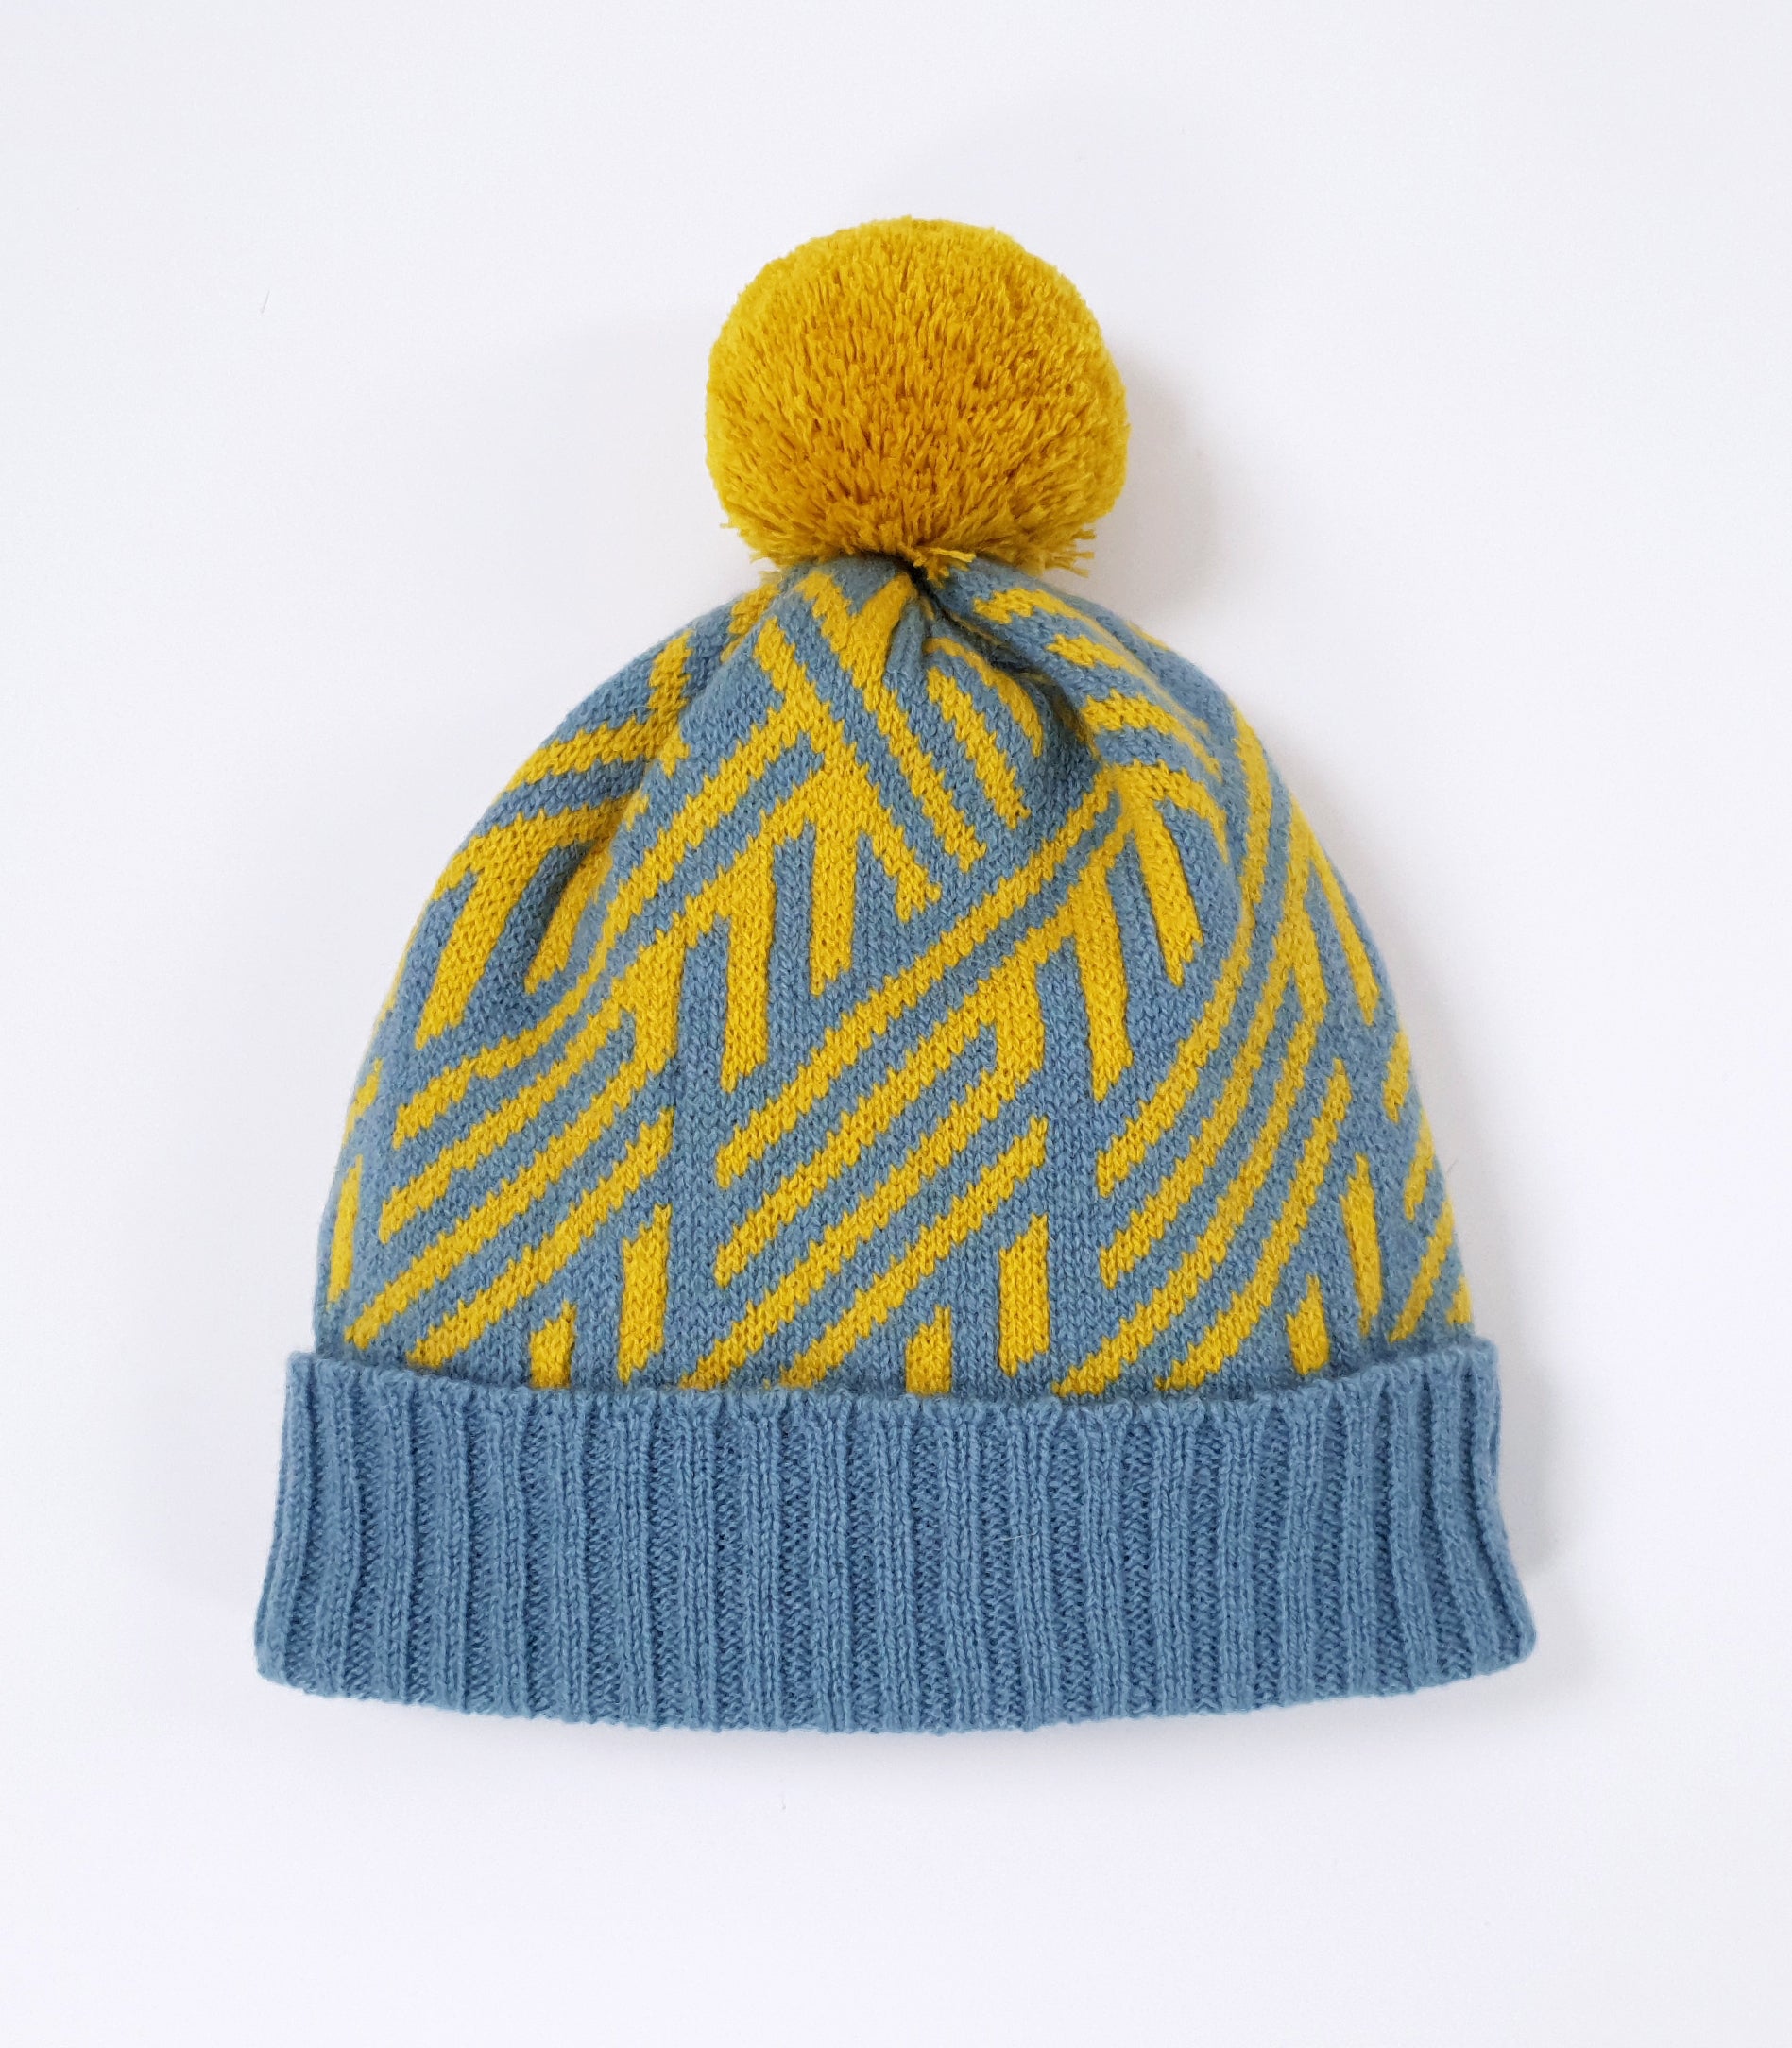 A knitted pom pom beanie hat with a ribbed blue hem. The main body of the hat has a yellow and blue crosswise pattern.